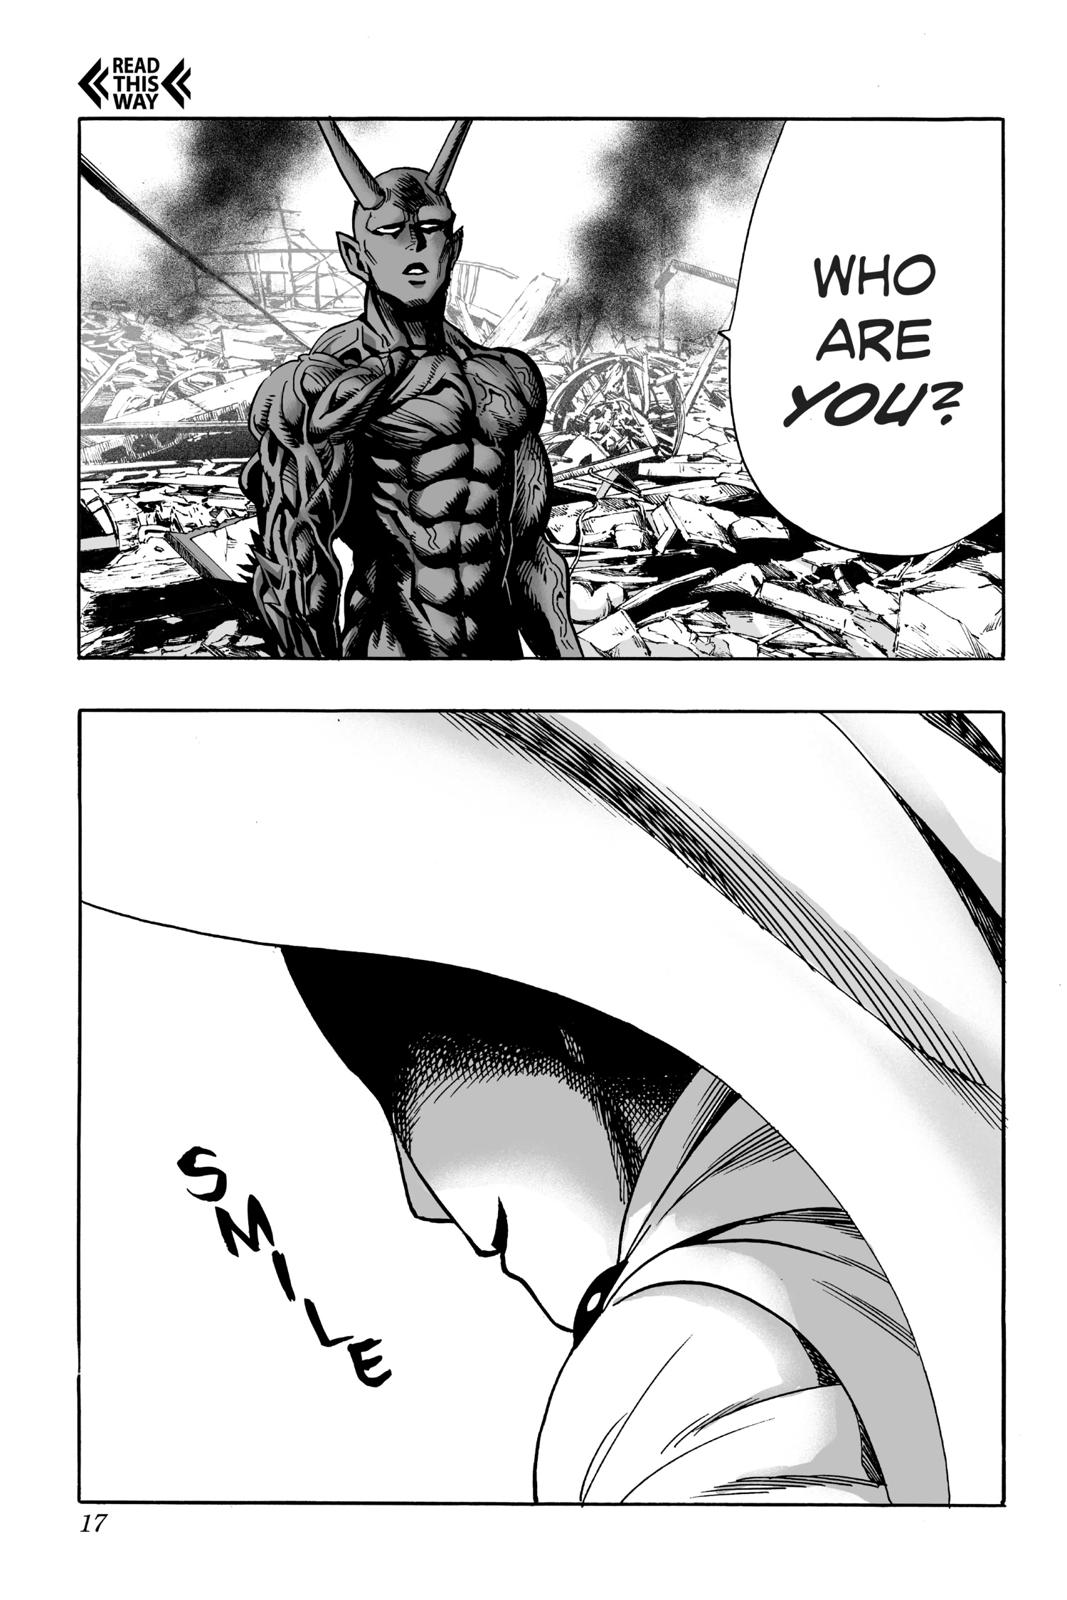 One-Punch Man, Punch 1 image 17